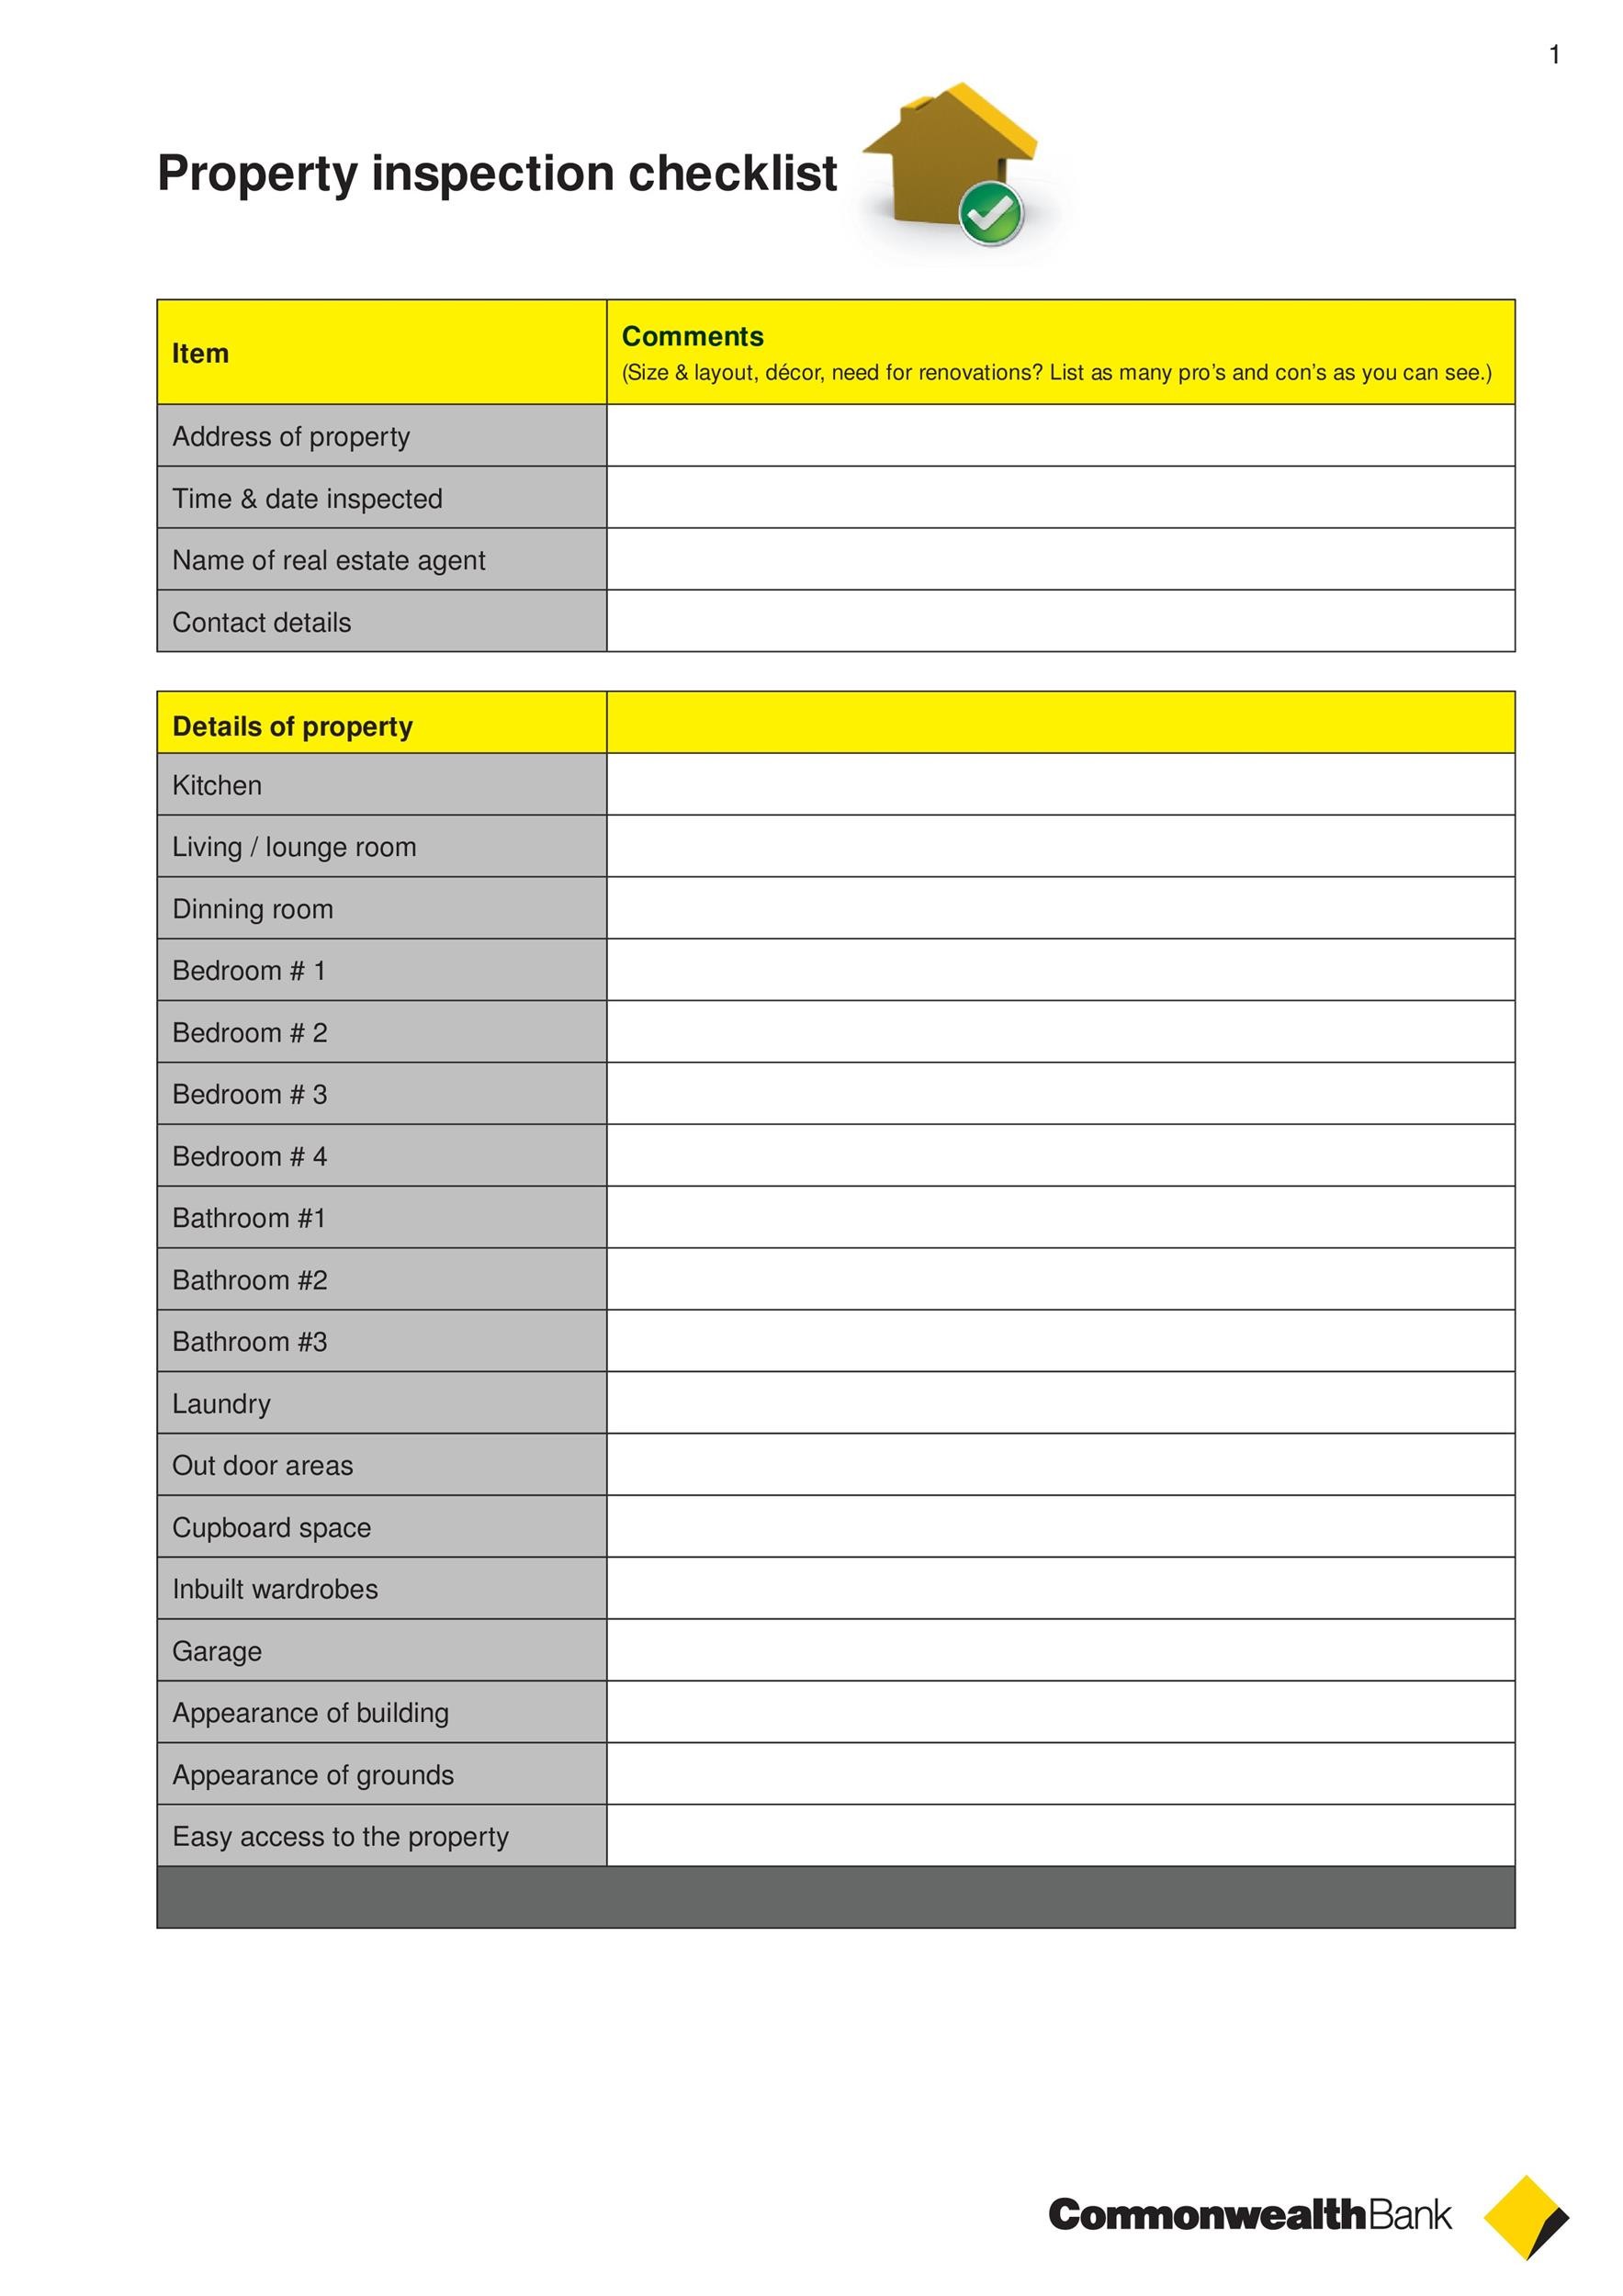 Property inspection checklist form